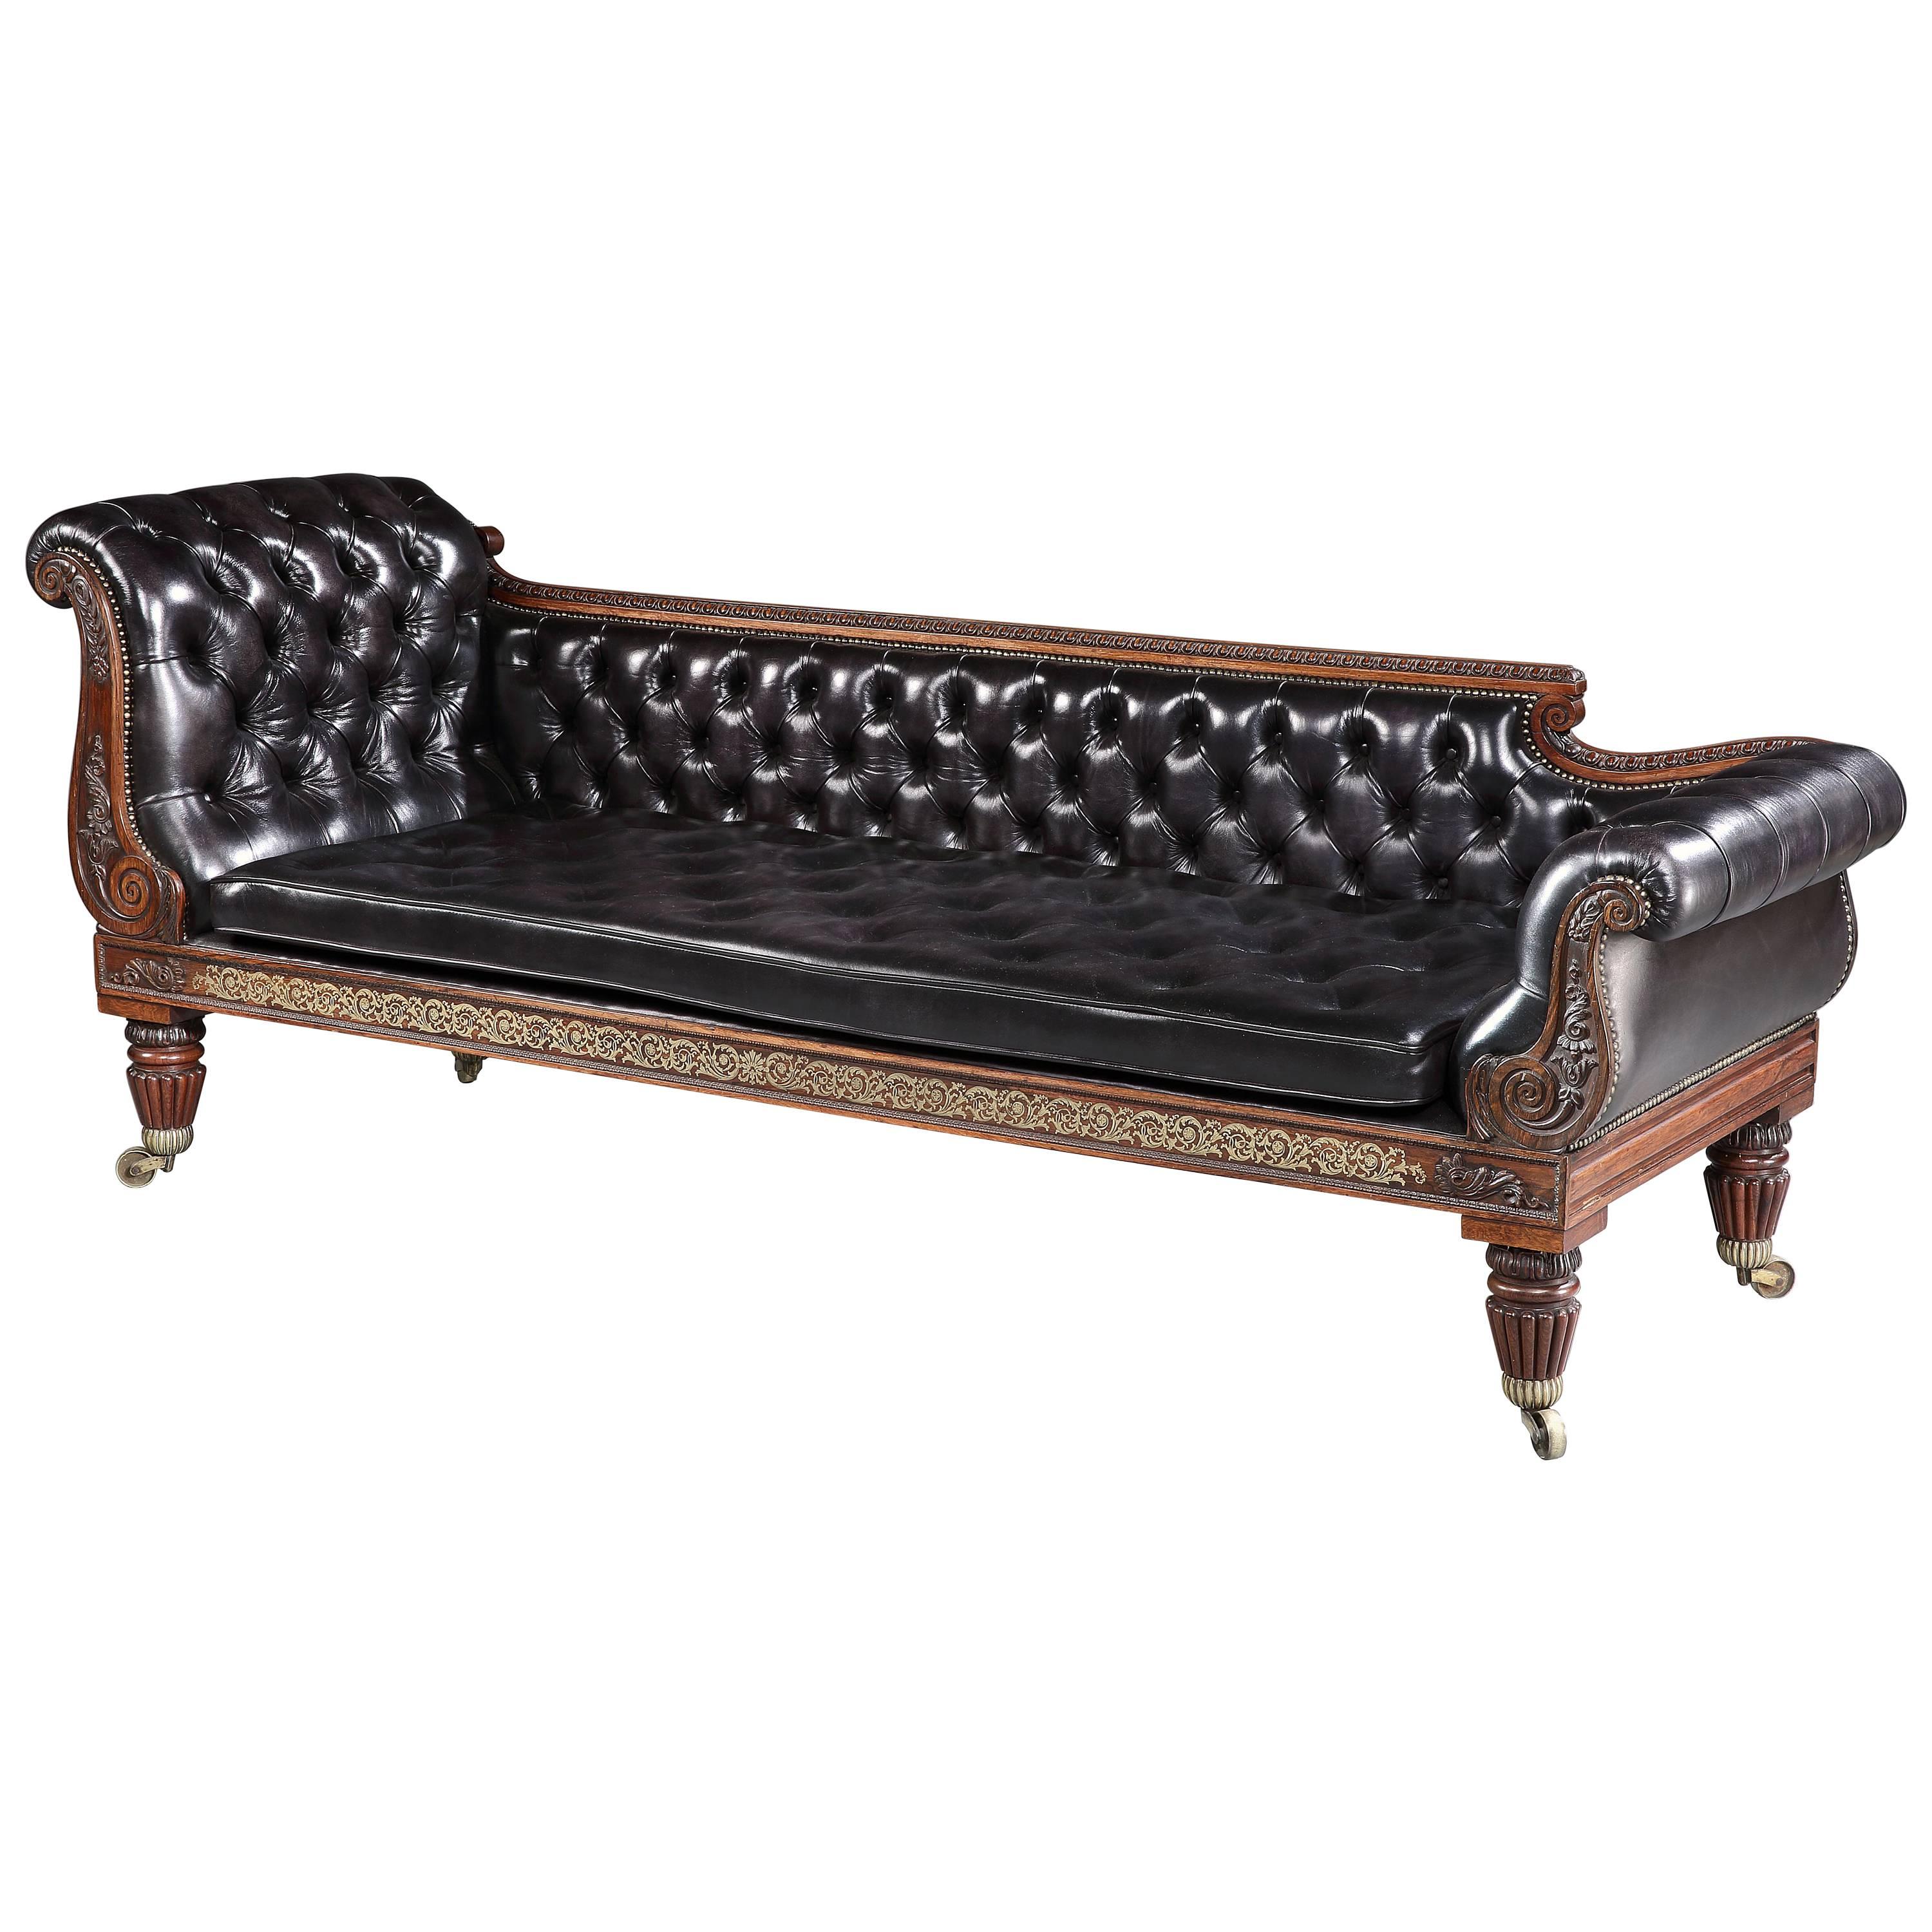 Antique Regency Period Daybed Attributed to William Trotter of Edinburgh